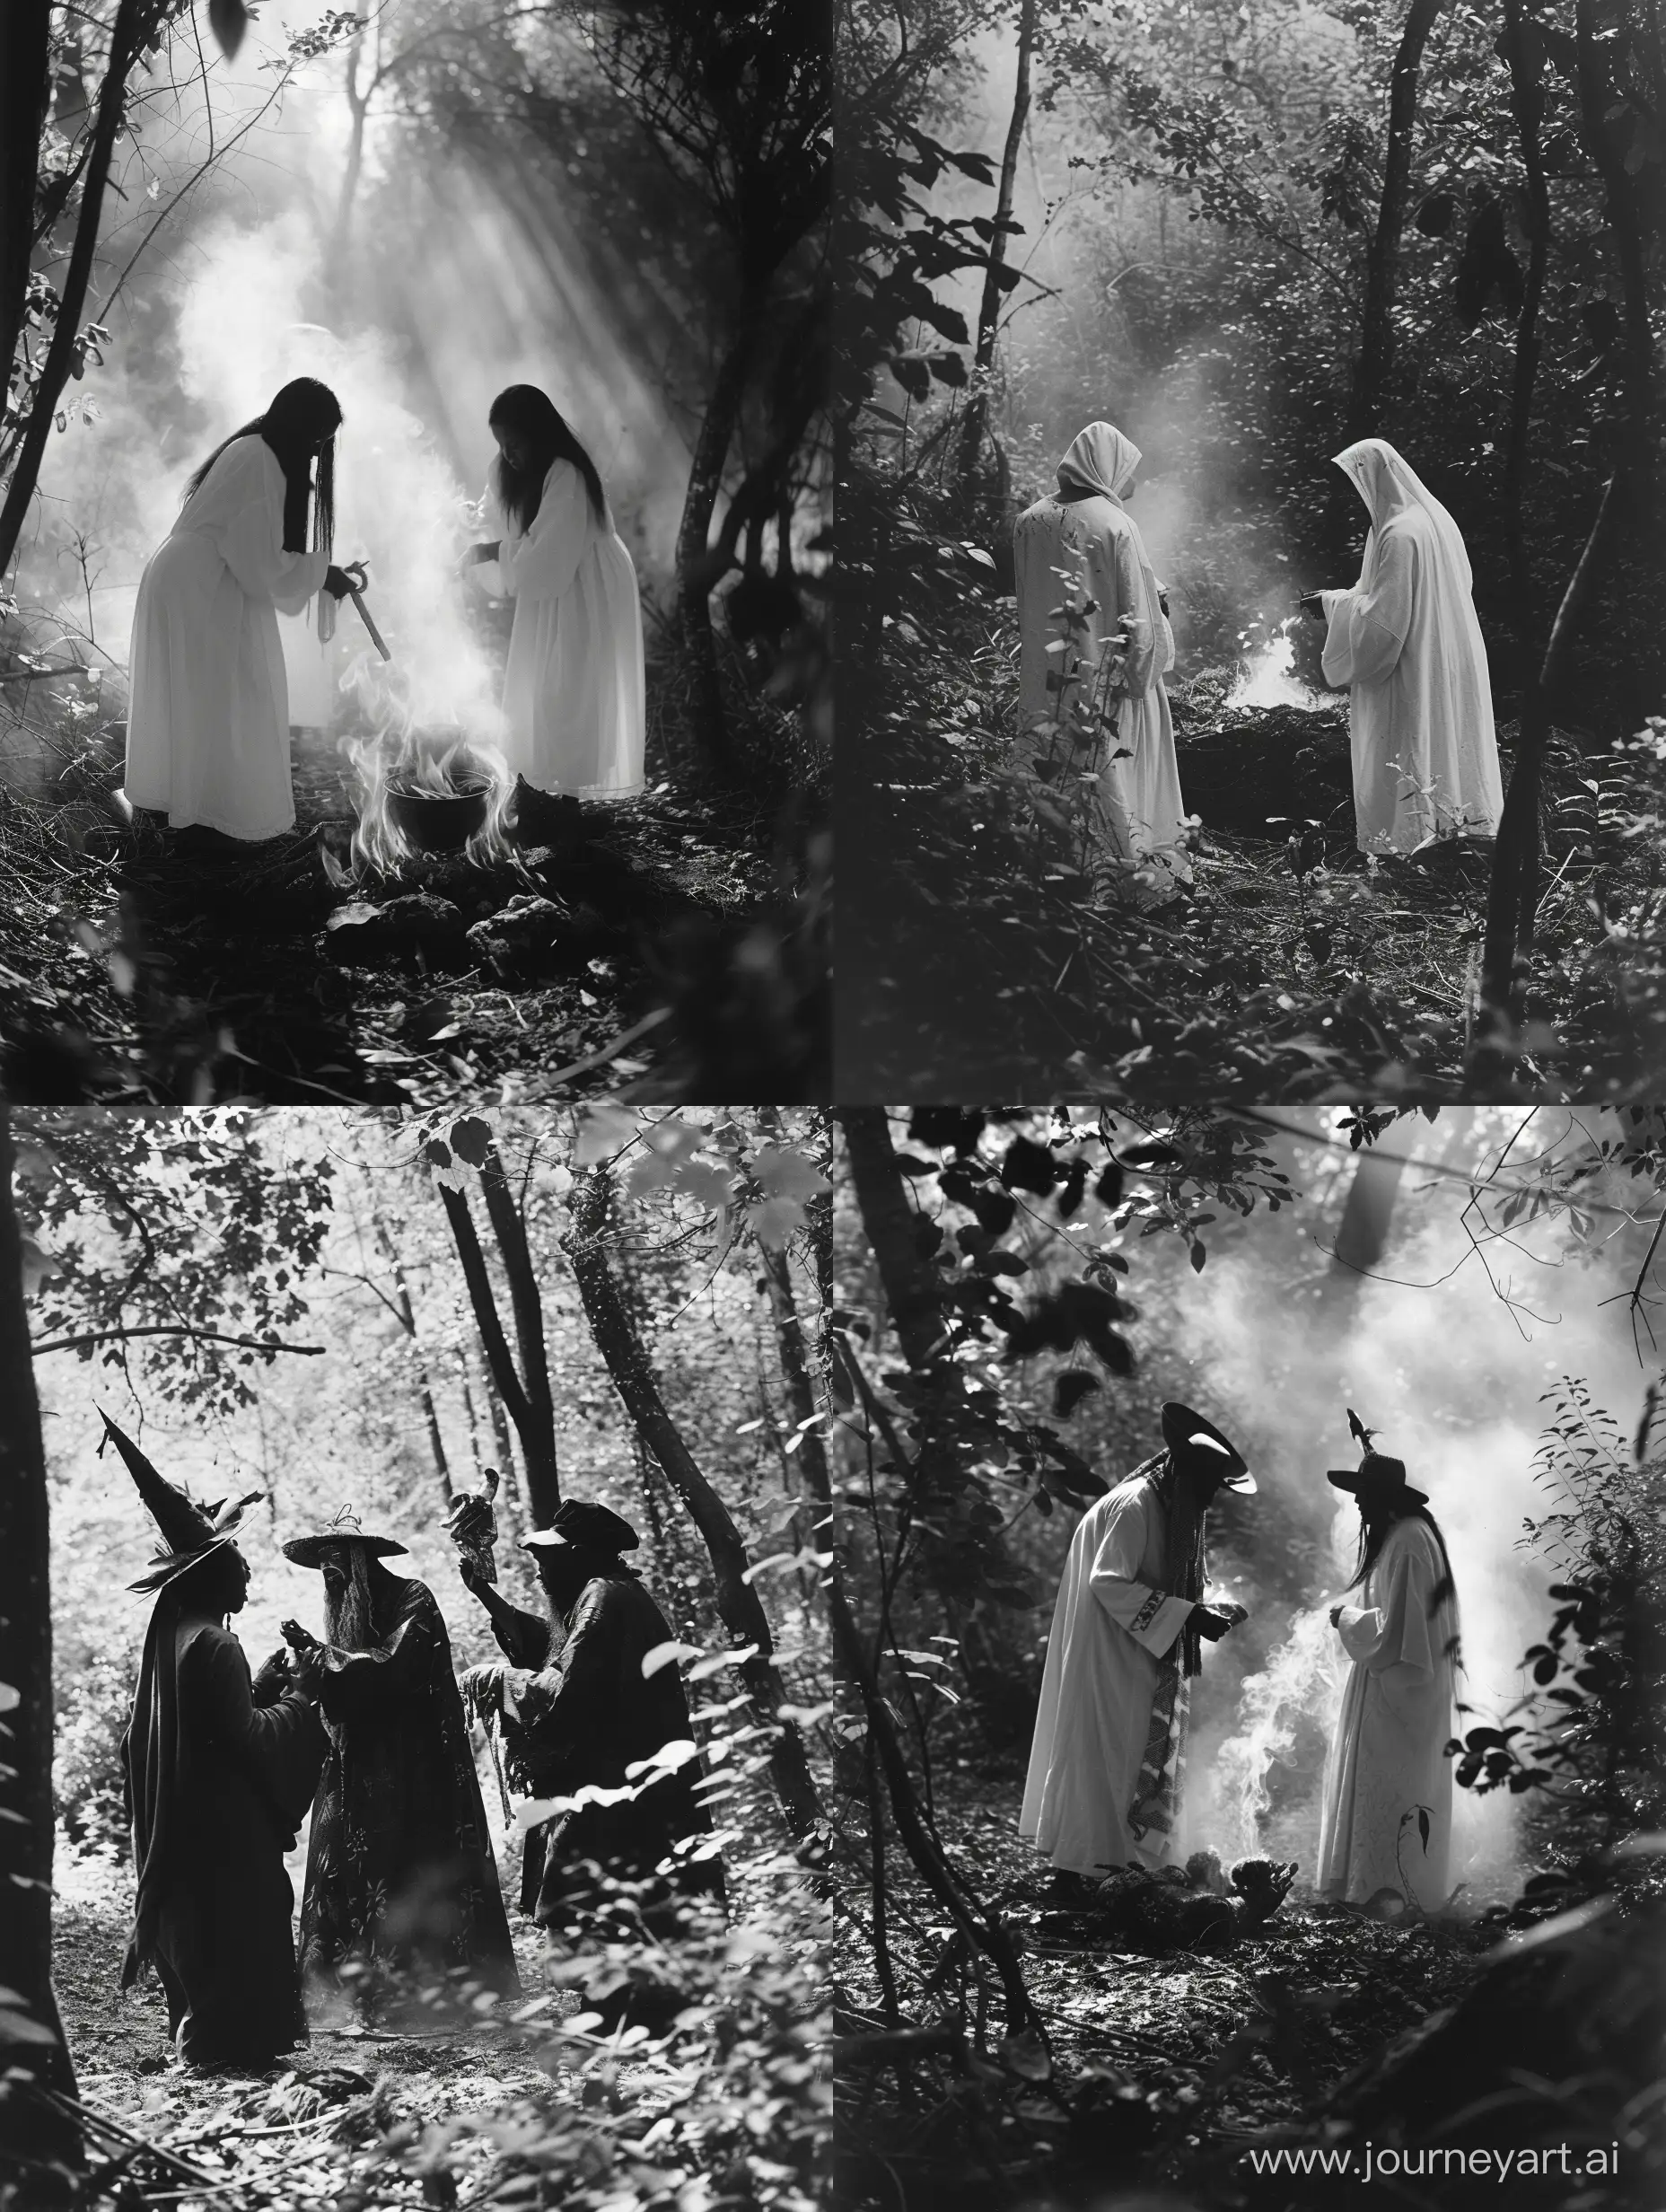 Mysterious-Voodoo-Ritual-in-Eerie-Forest-Folk-Horror-Grayscale-Photo